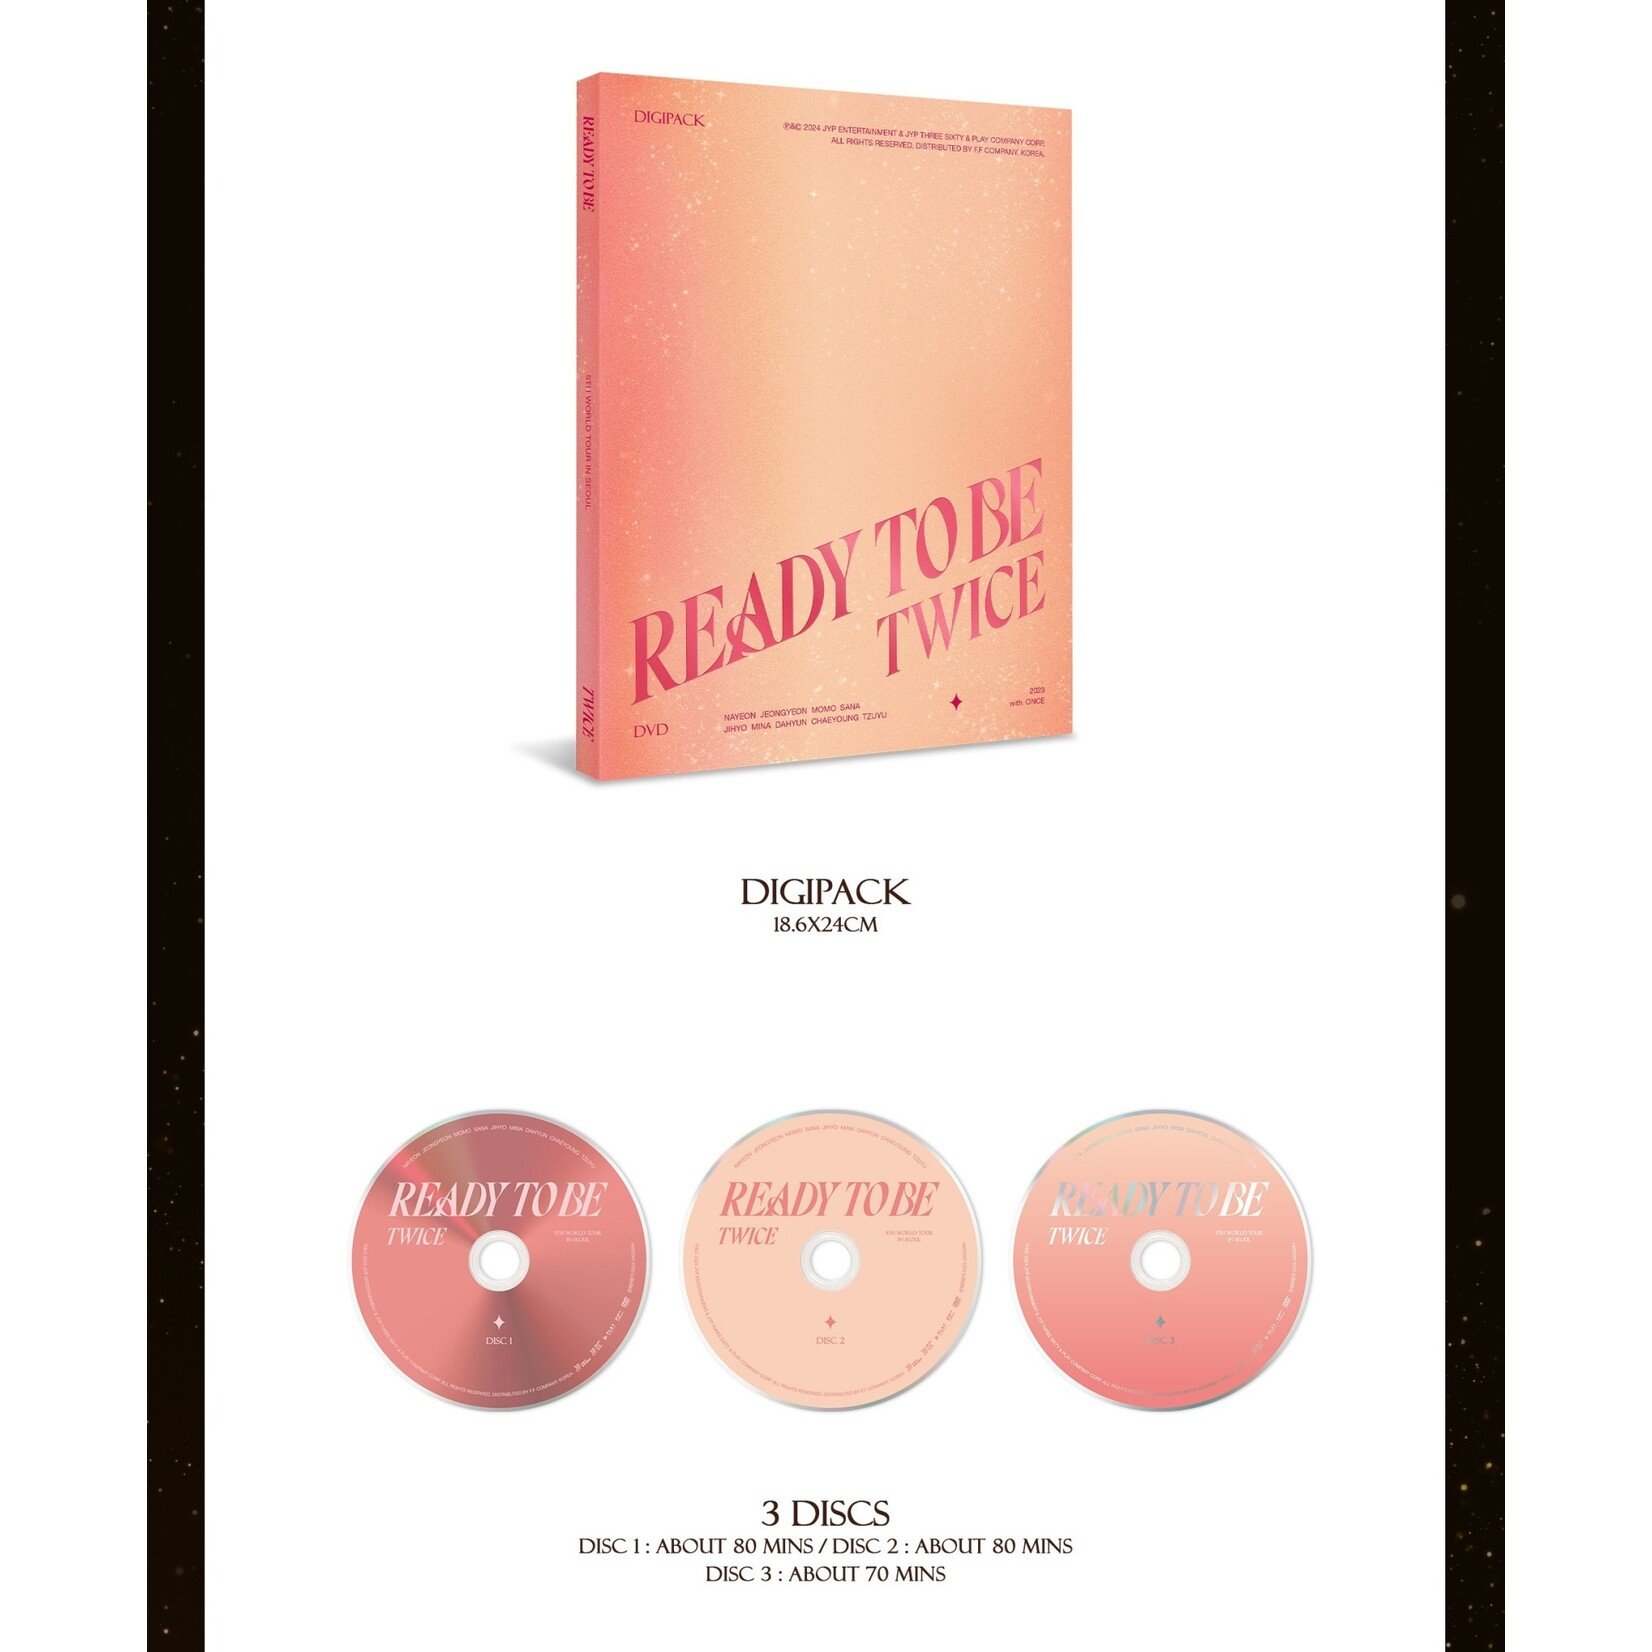 Twice TWICE - 5TH WORLD TOUR [READY TO BE] IN SEOUL (DVD)